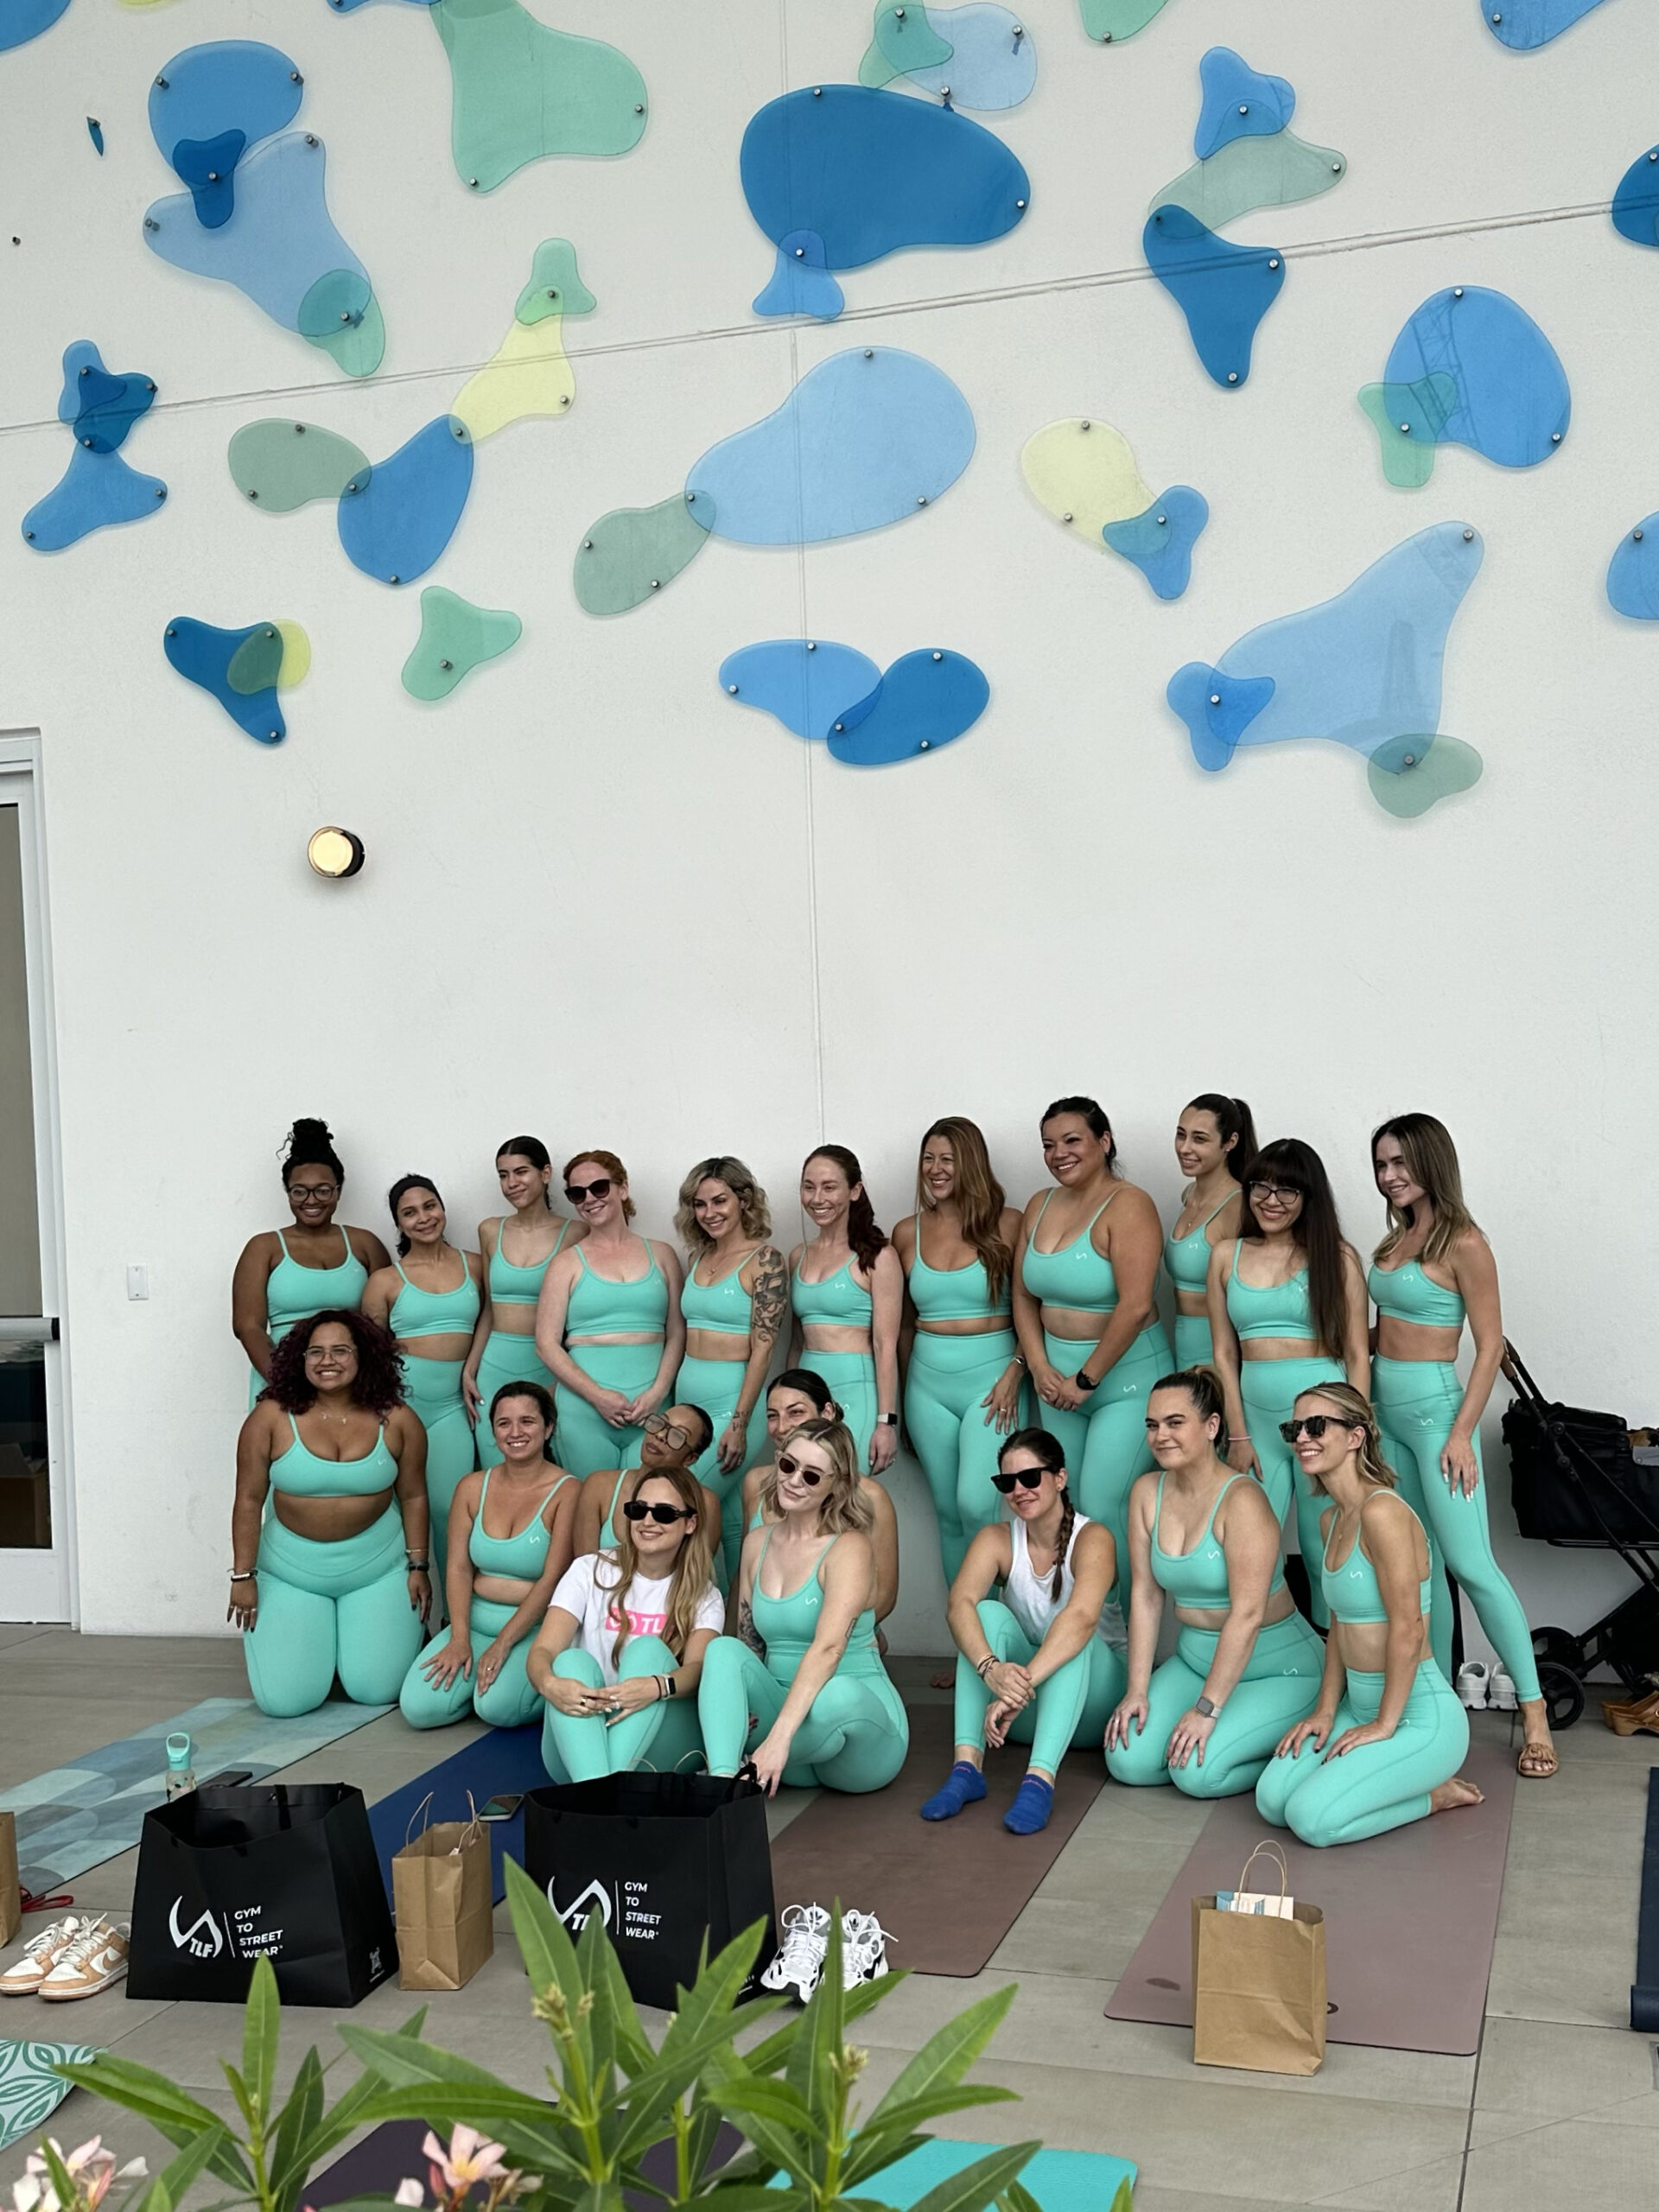 A group of people in matching turquoise workout attire posing together on yoga mats indoors. Wall in the background is decorated with abstract, colorful shapes. Shopping bags are in the foreground.